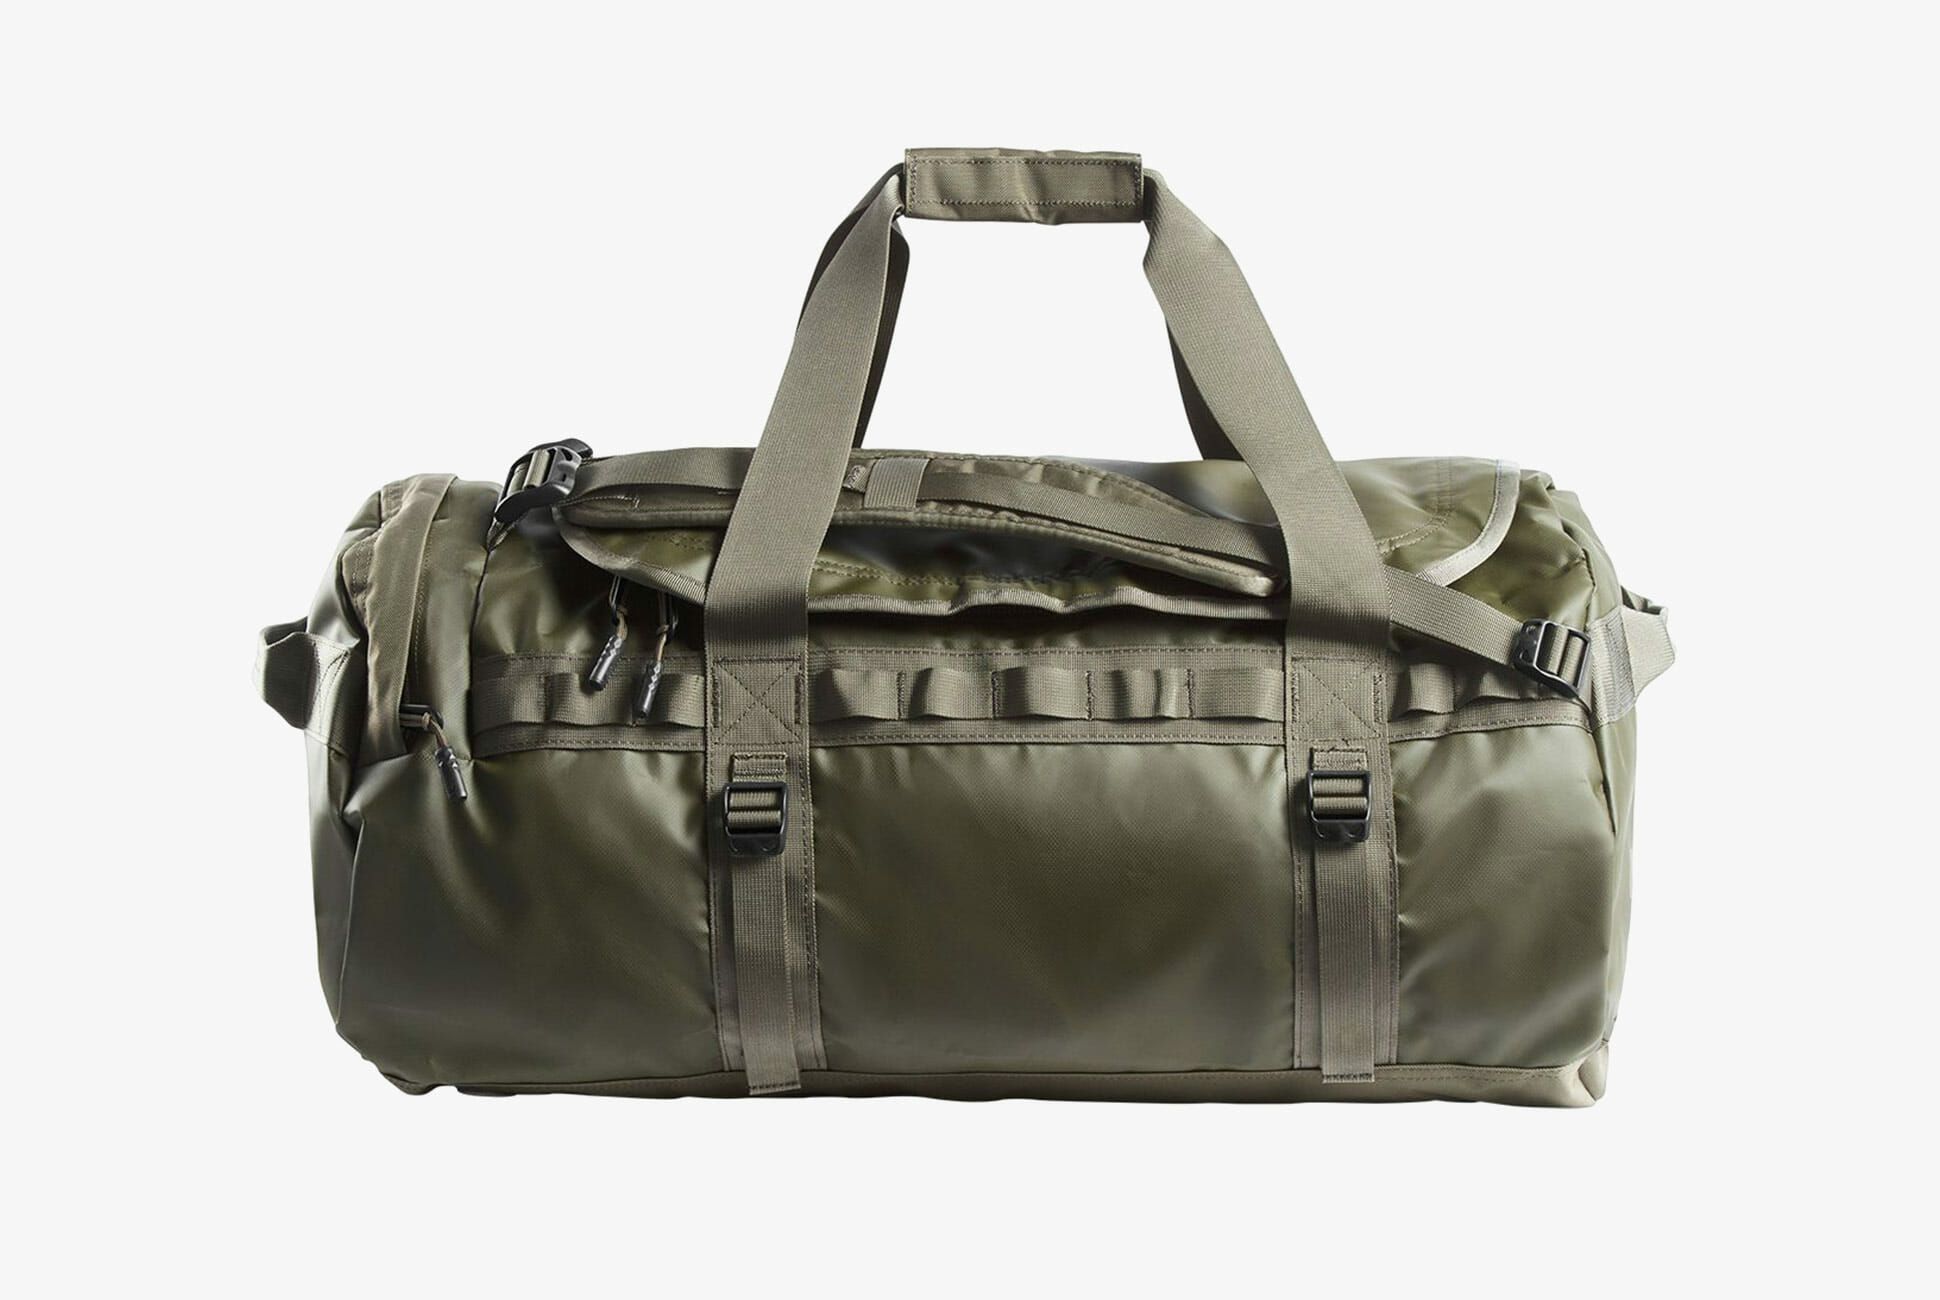 north face base camp duffel large sale